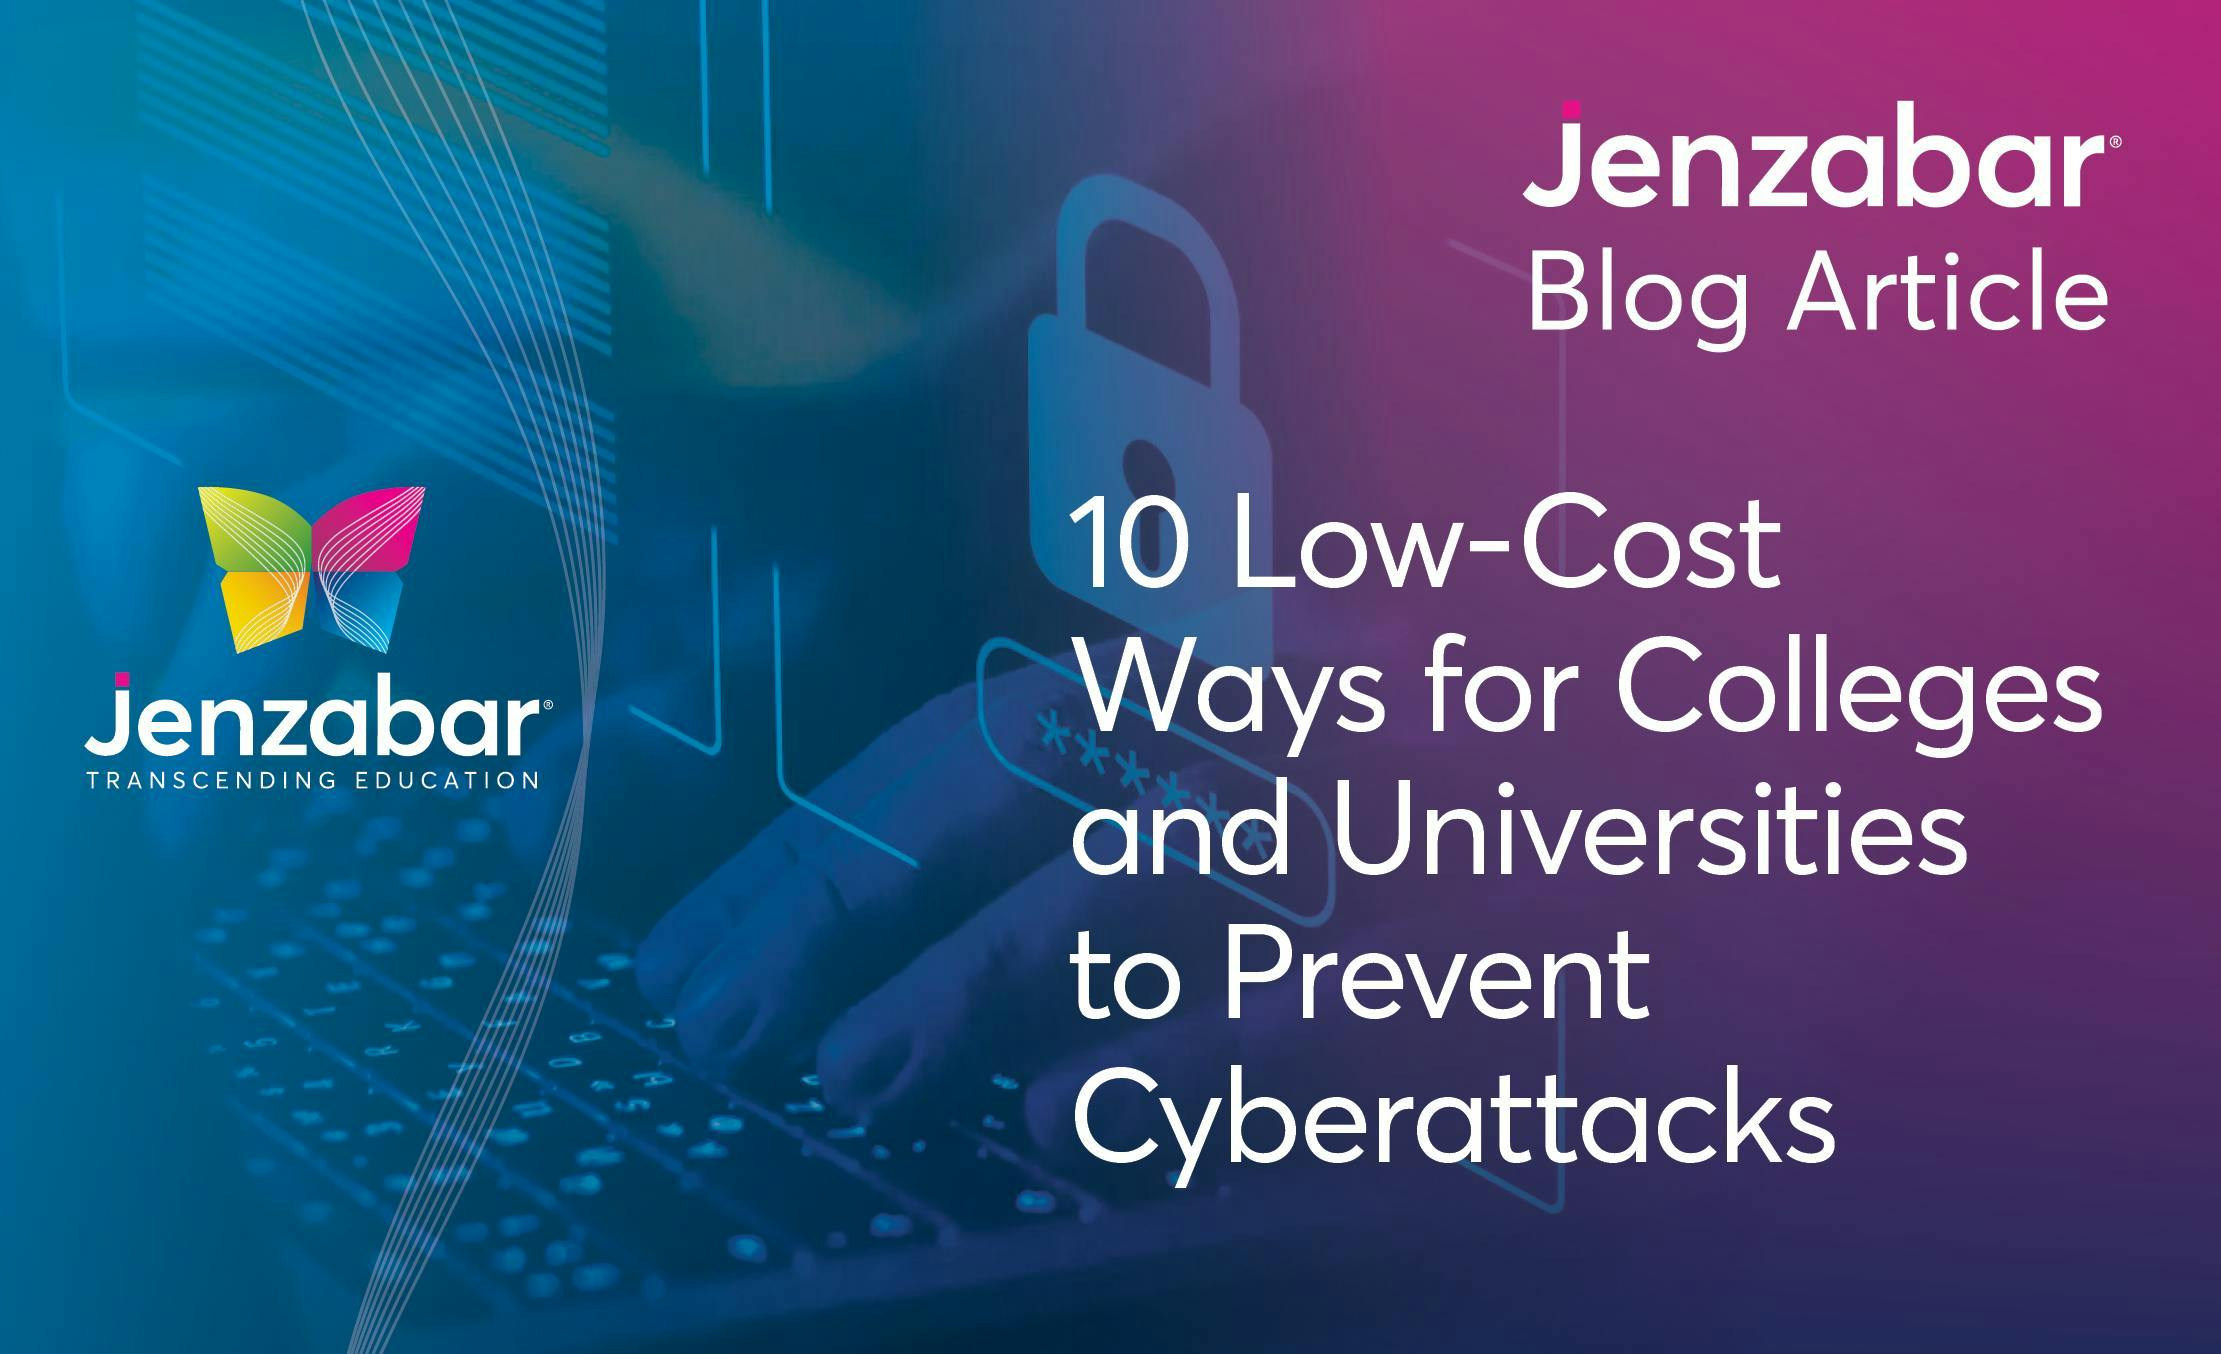 Blog: 10 Low-Cost Ways for Colleges and Universities to Prevent Cyberattacks